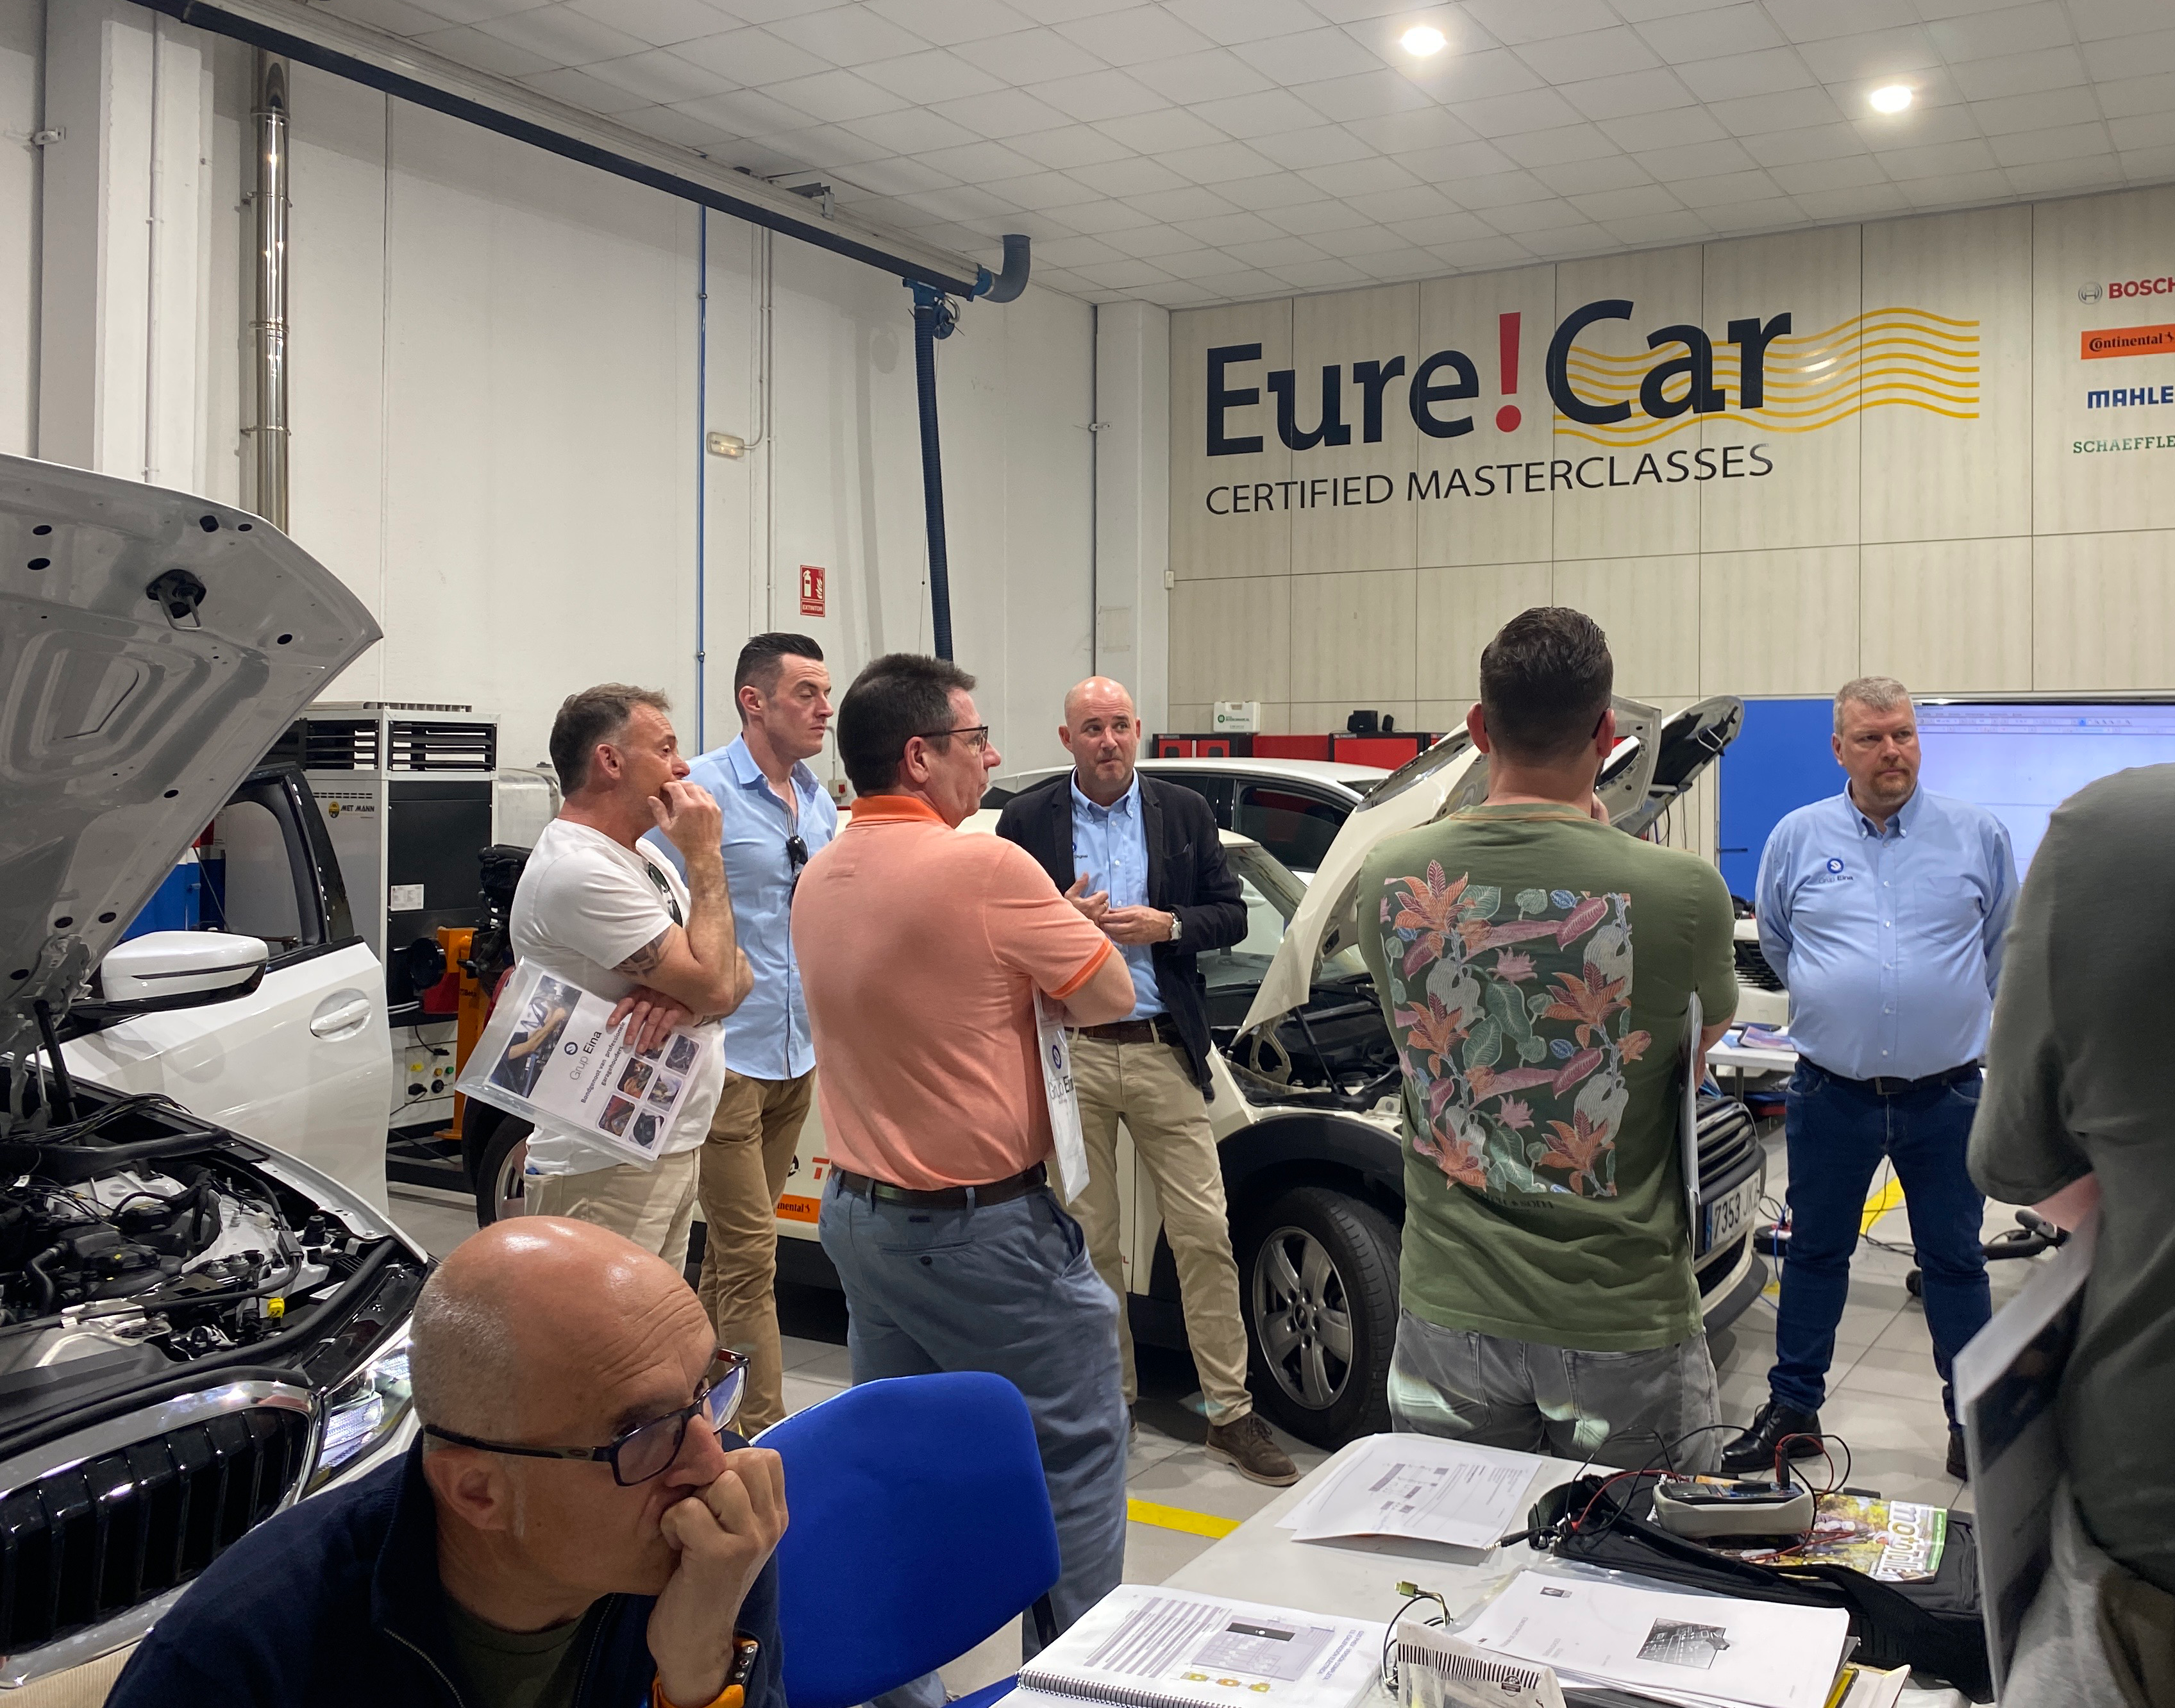 During the visit, they had the opportunity to get to know Grup Eina in greater depth, as well as the range of services available to make the day-to-day of garage professionals easier